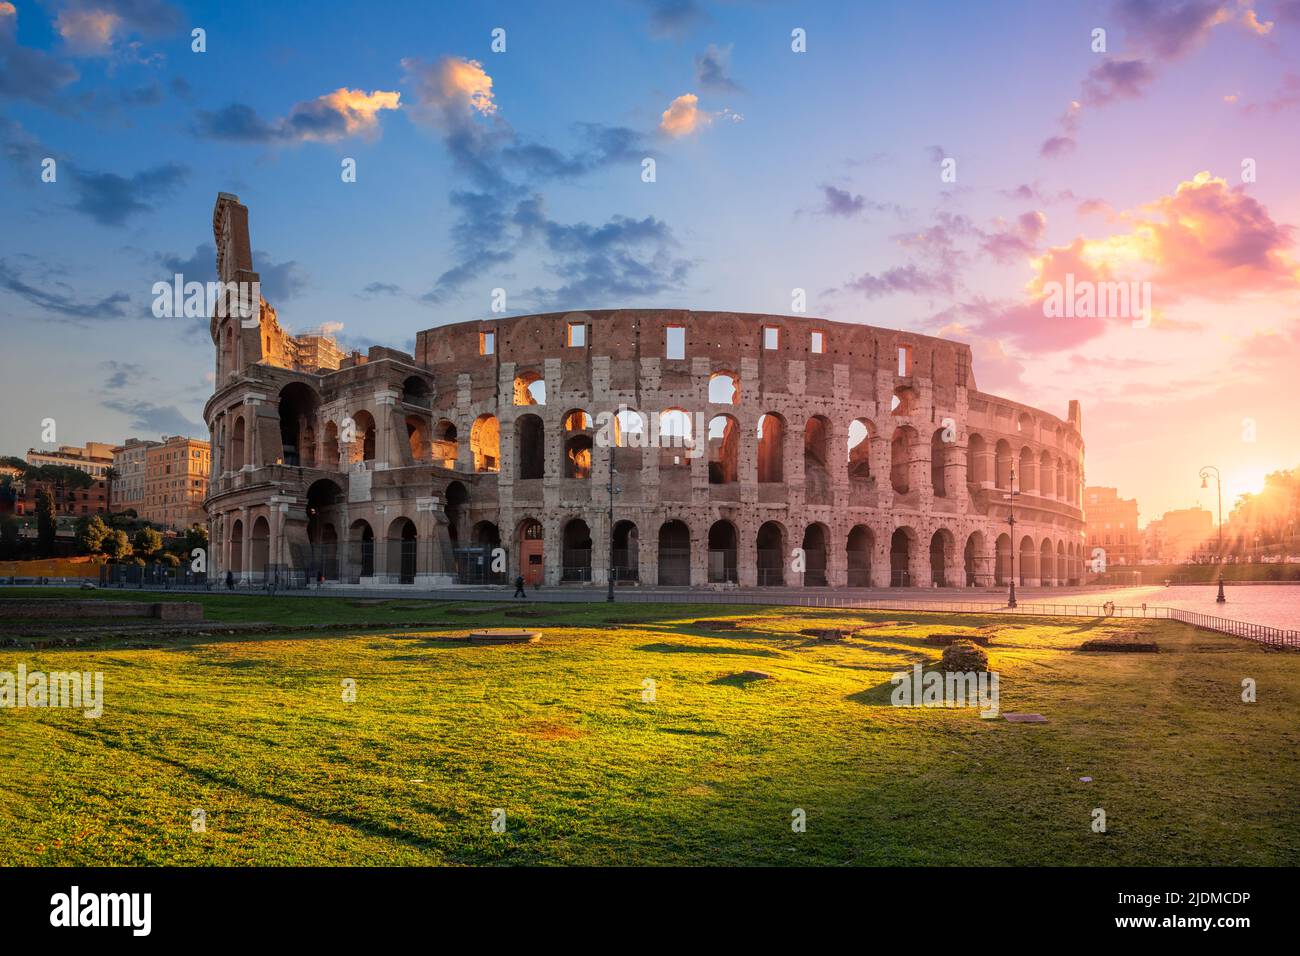 Rome, Italy with the ancient Roman Colosseum Amphitheater at sunrise. Stock Photo